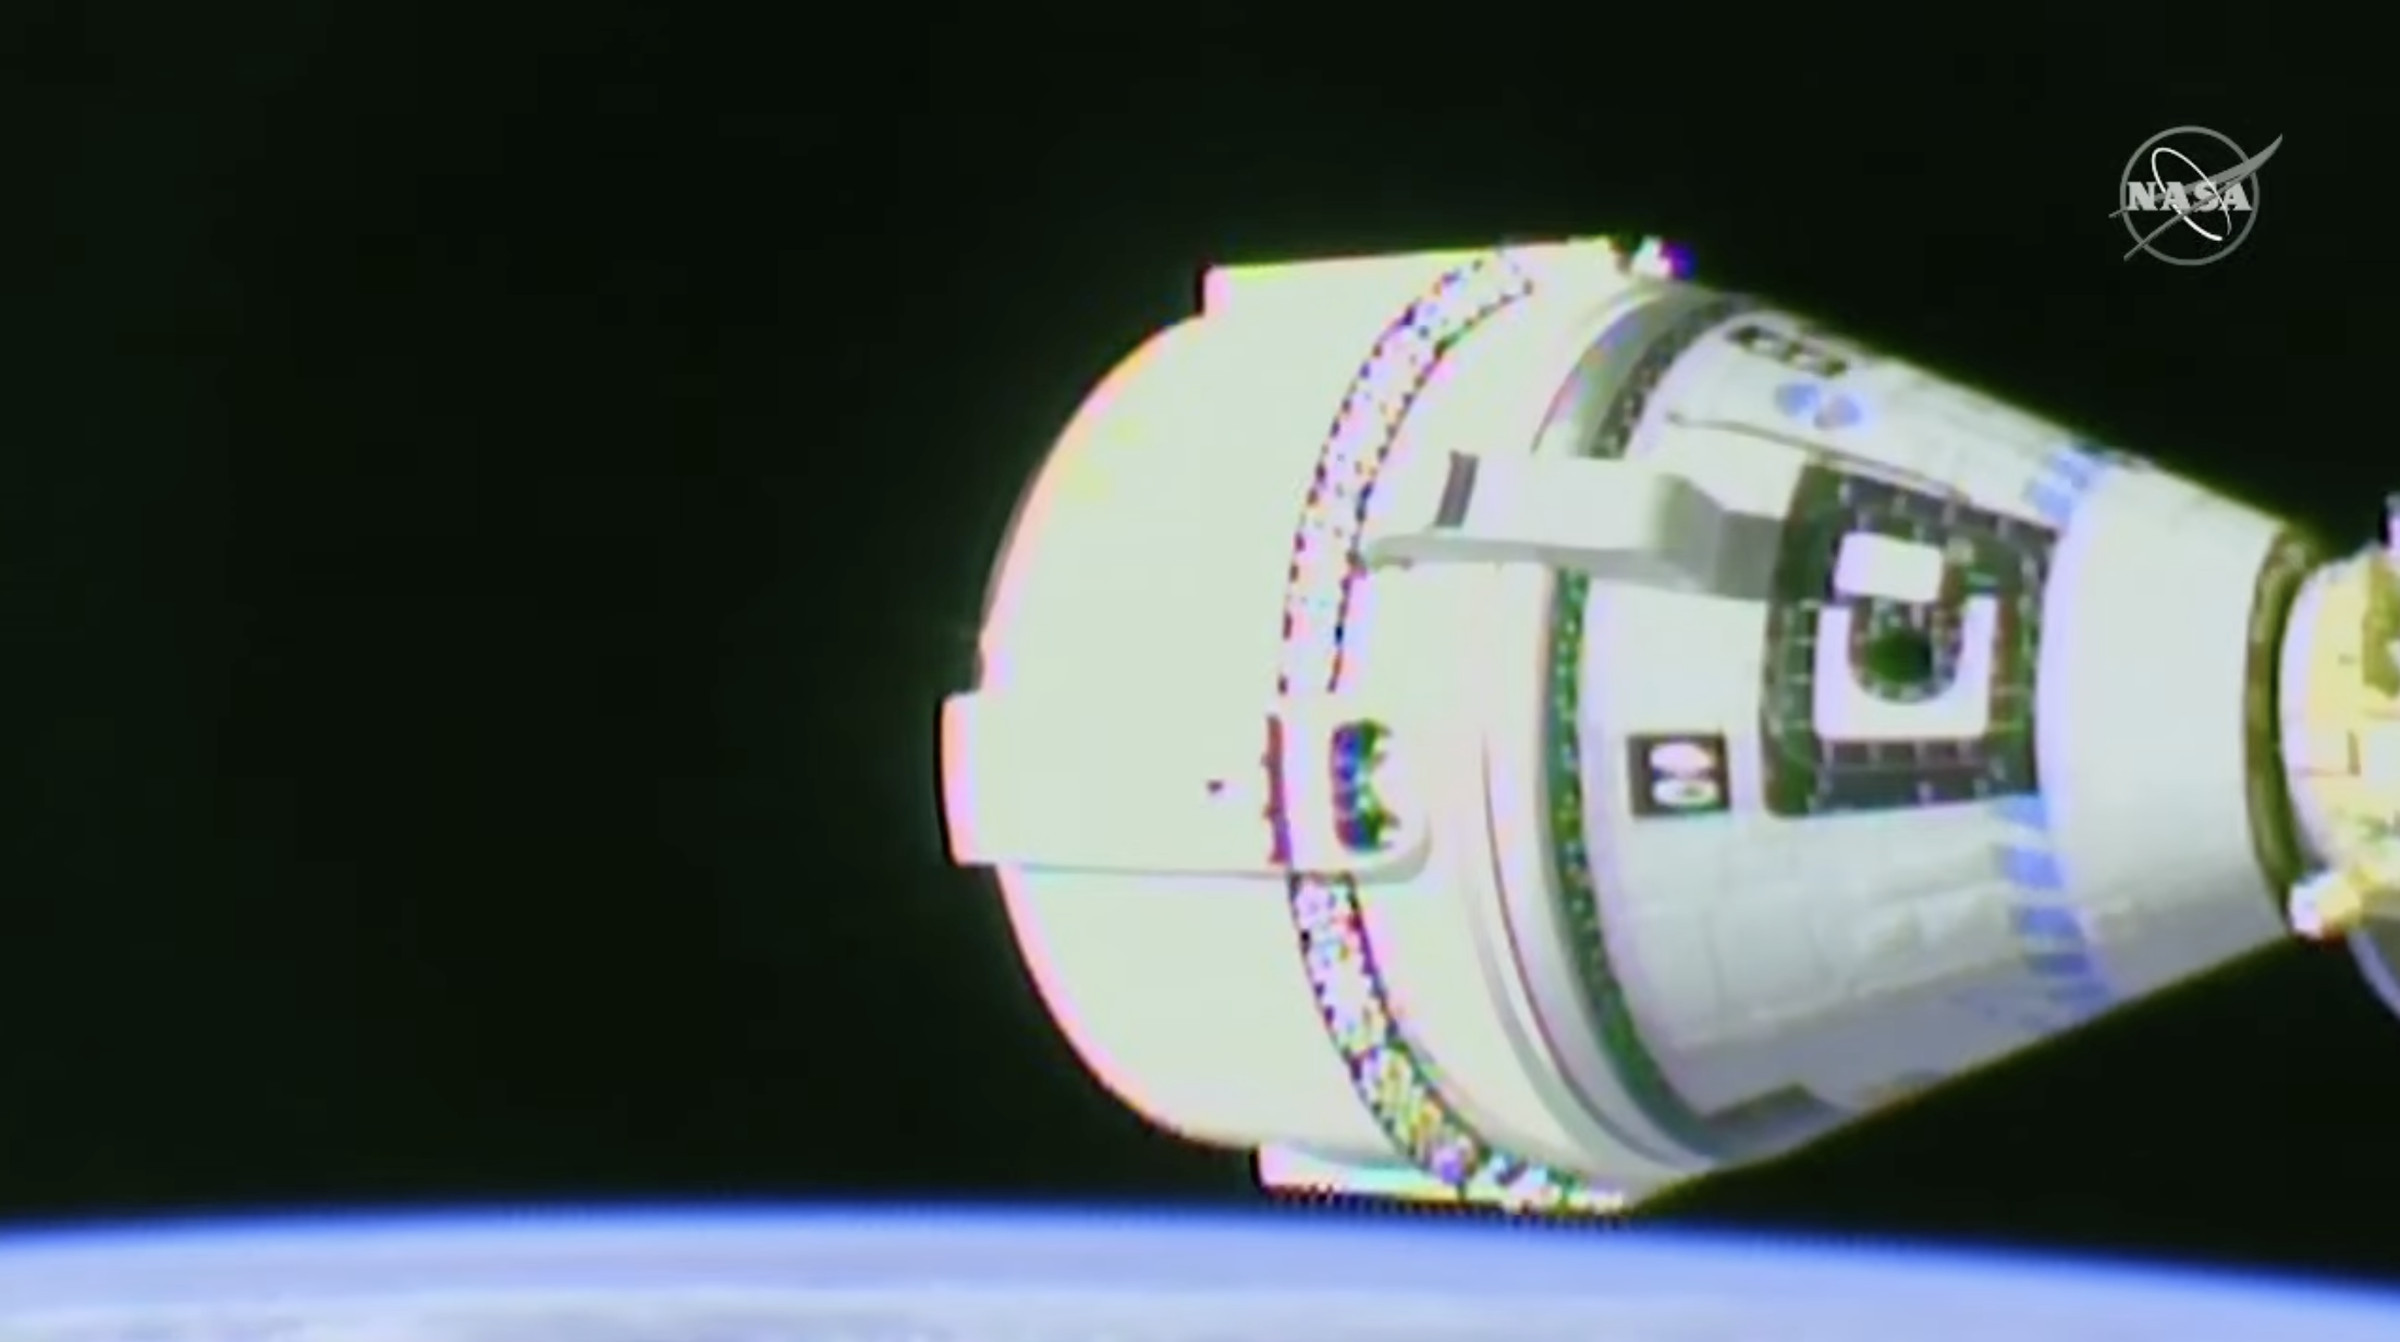 Starliner docked with the International Space Station